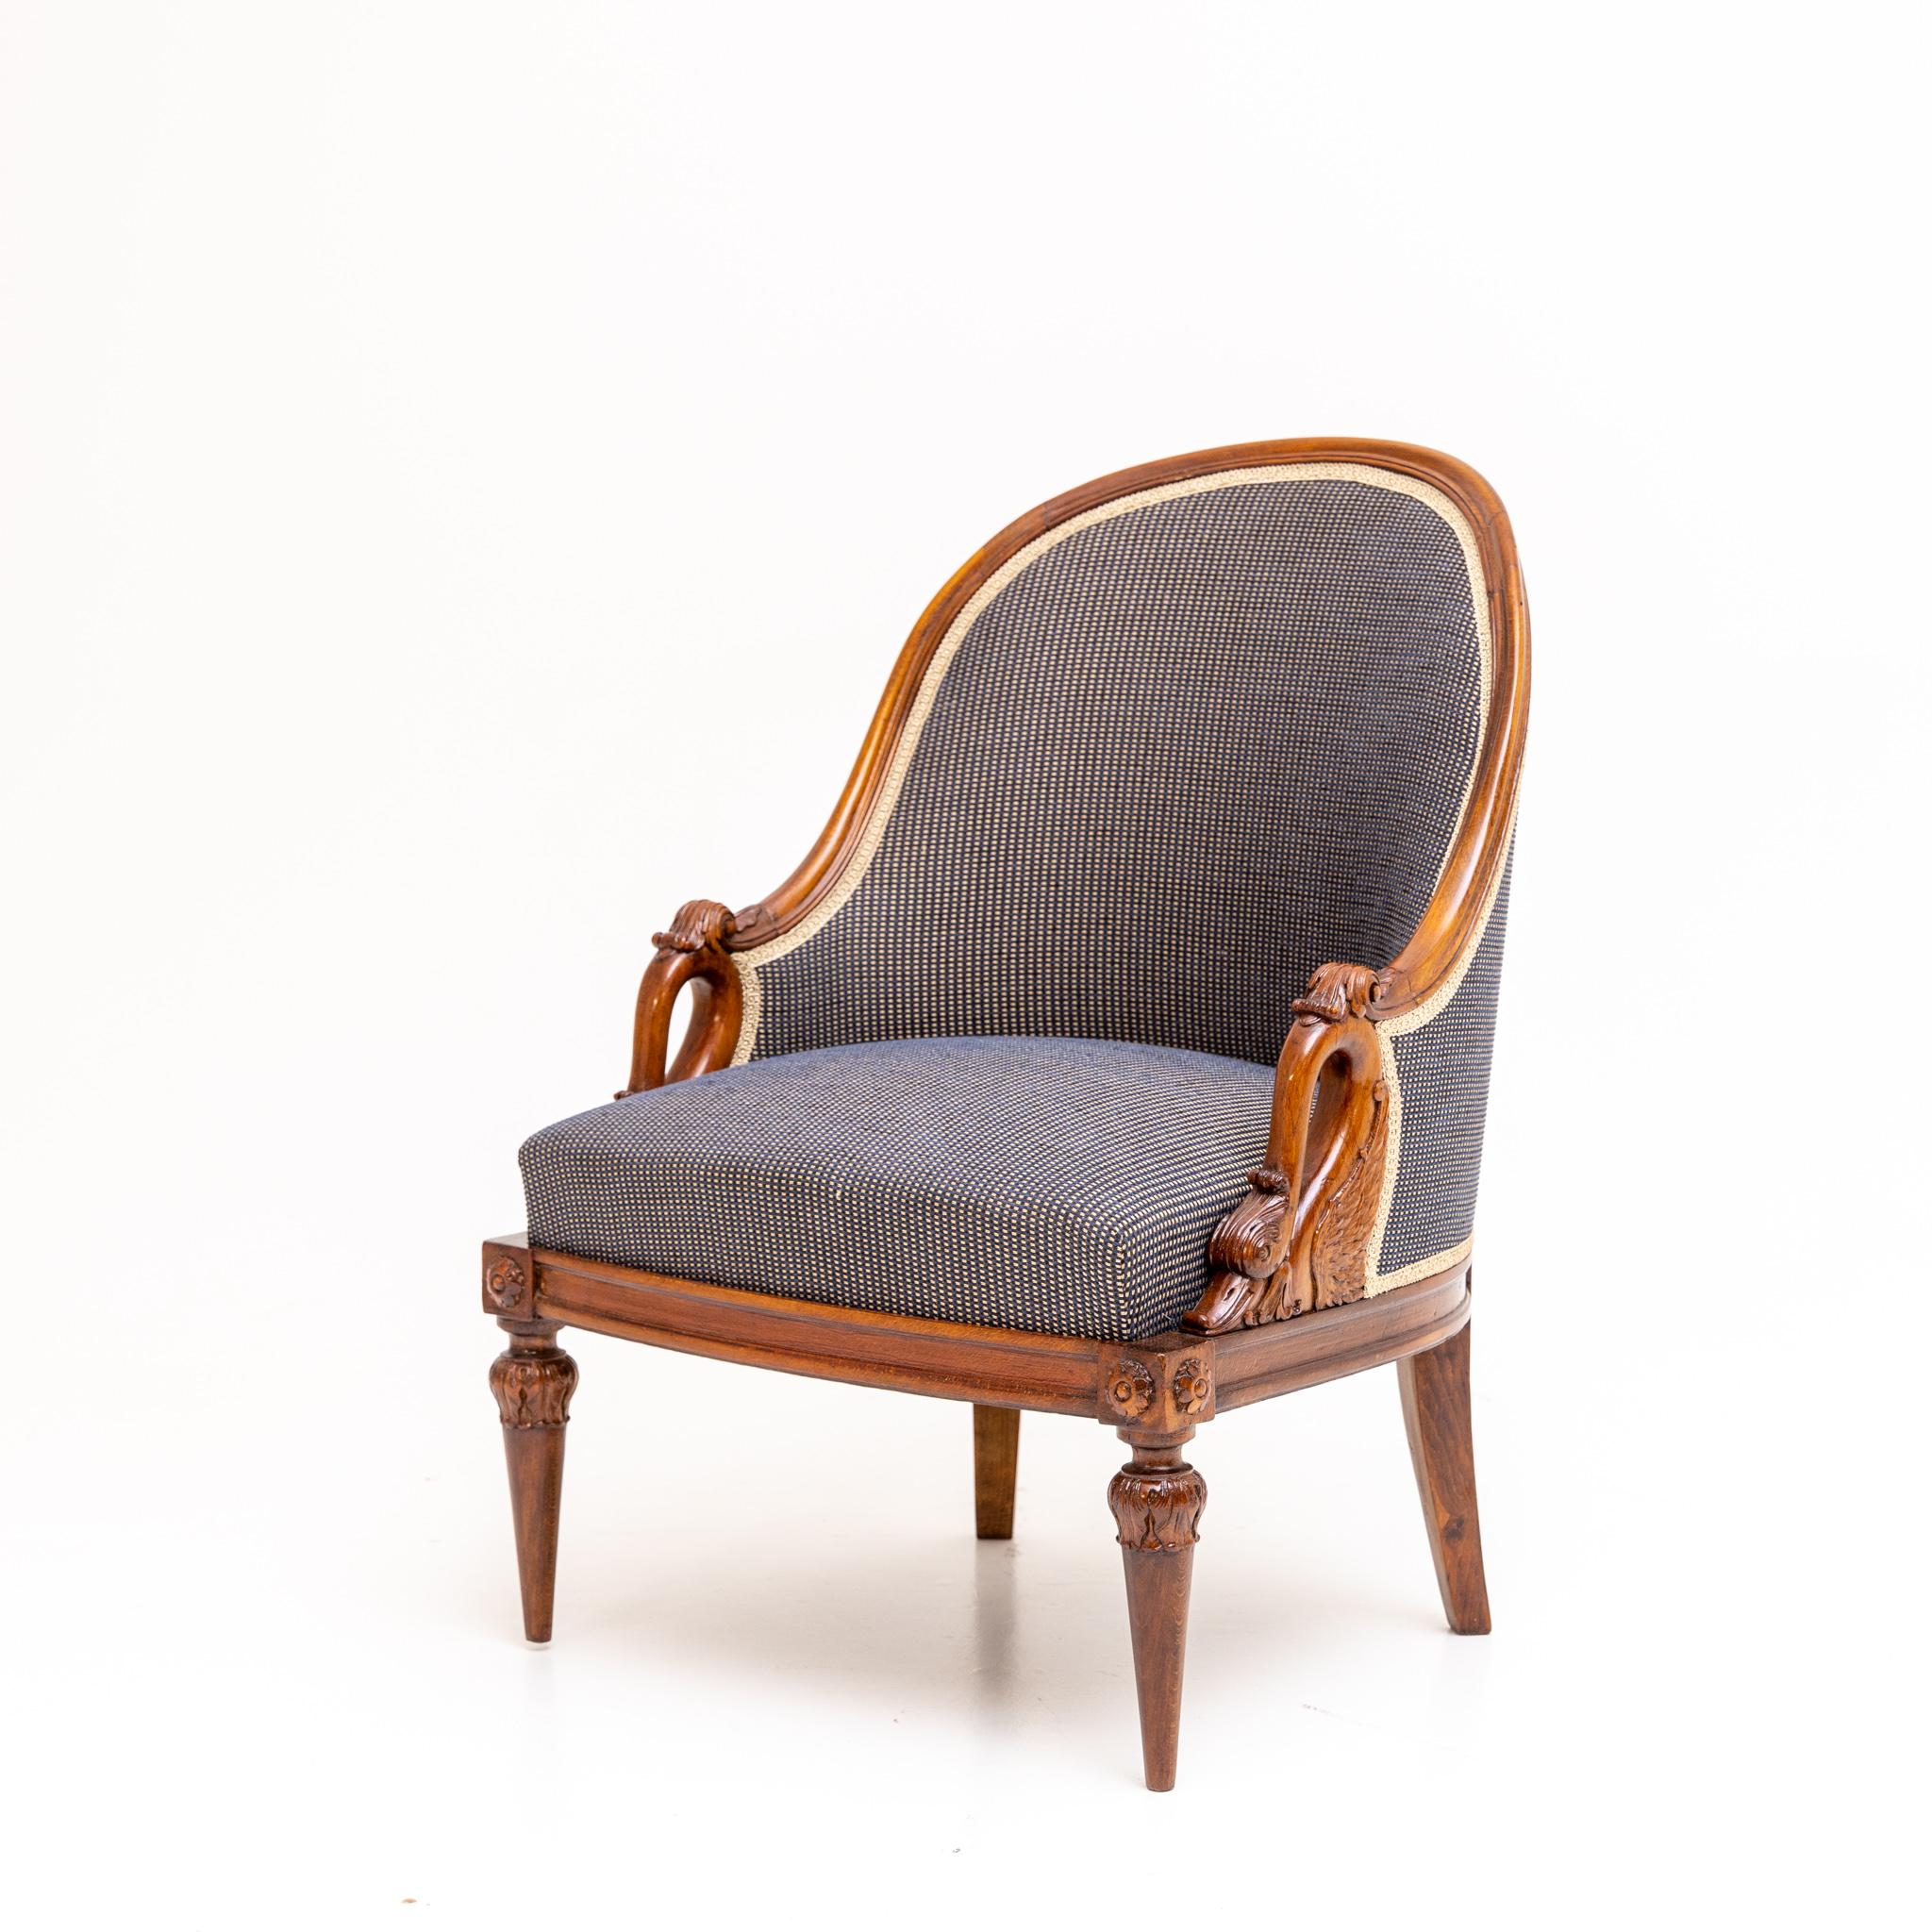 Empire style Bergere Chairs, 2nd Half 19th Century 2